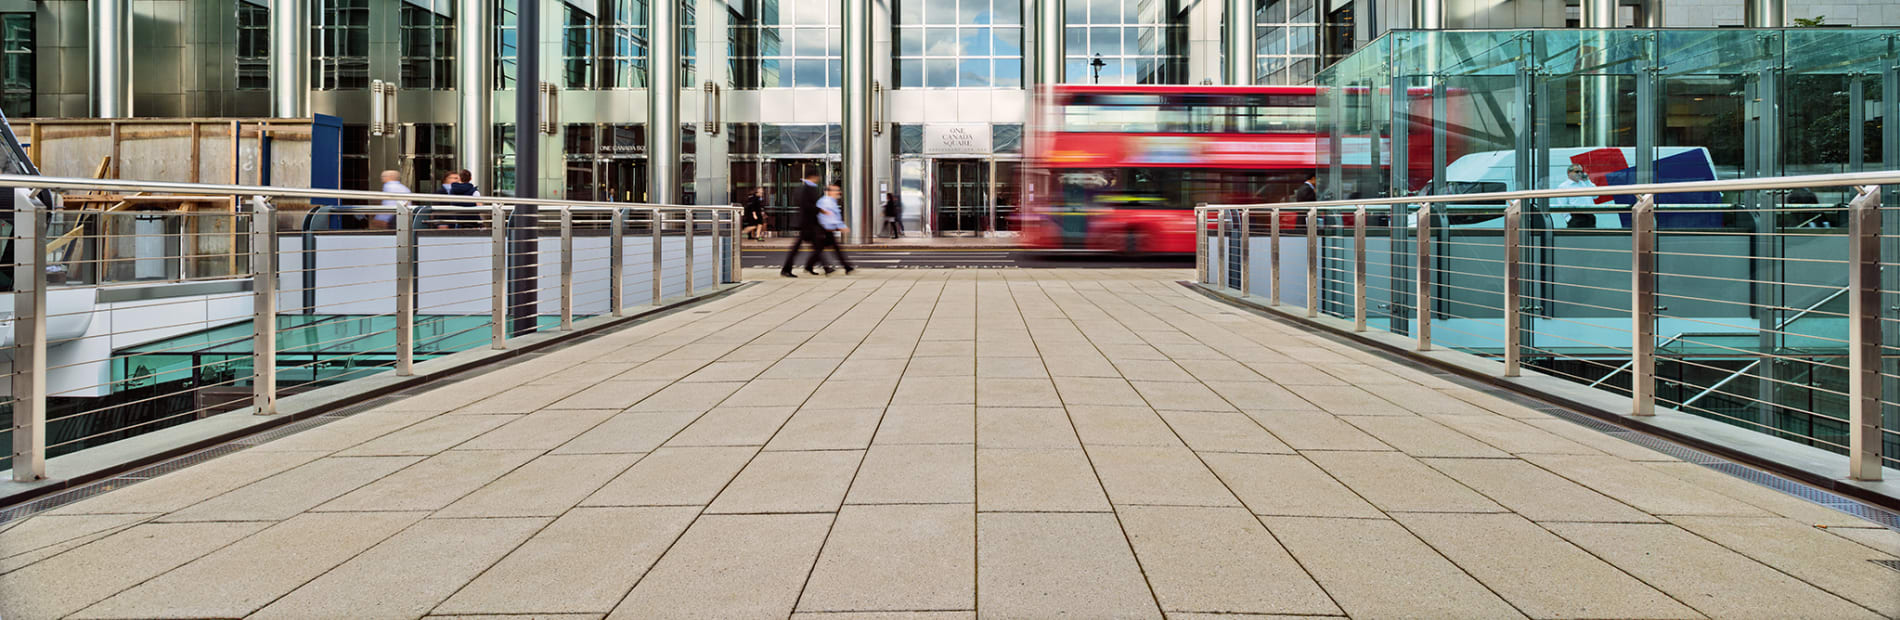 charnwood paving insitu london with a red bus